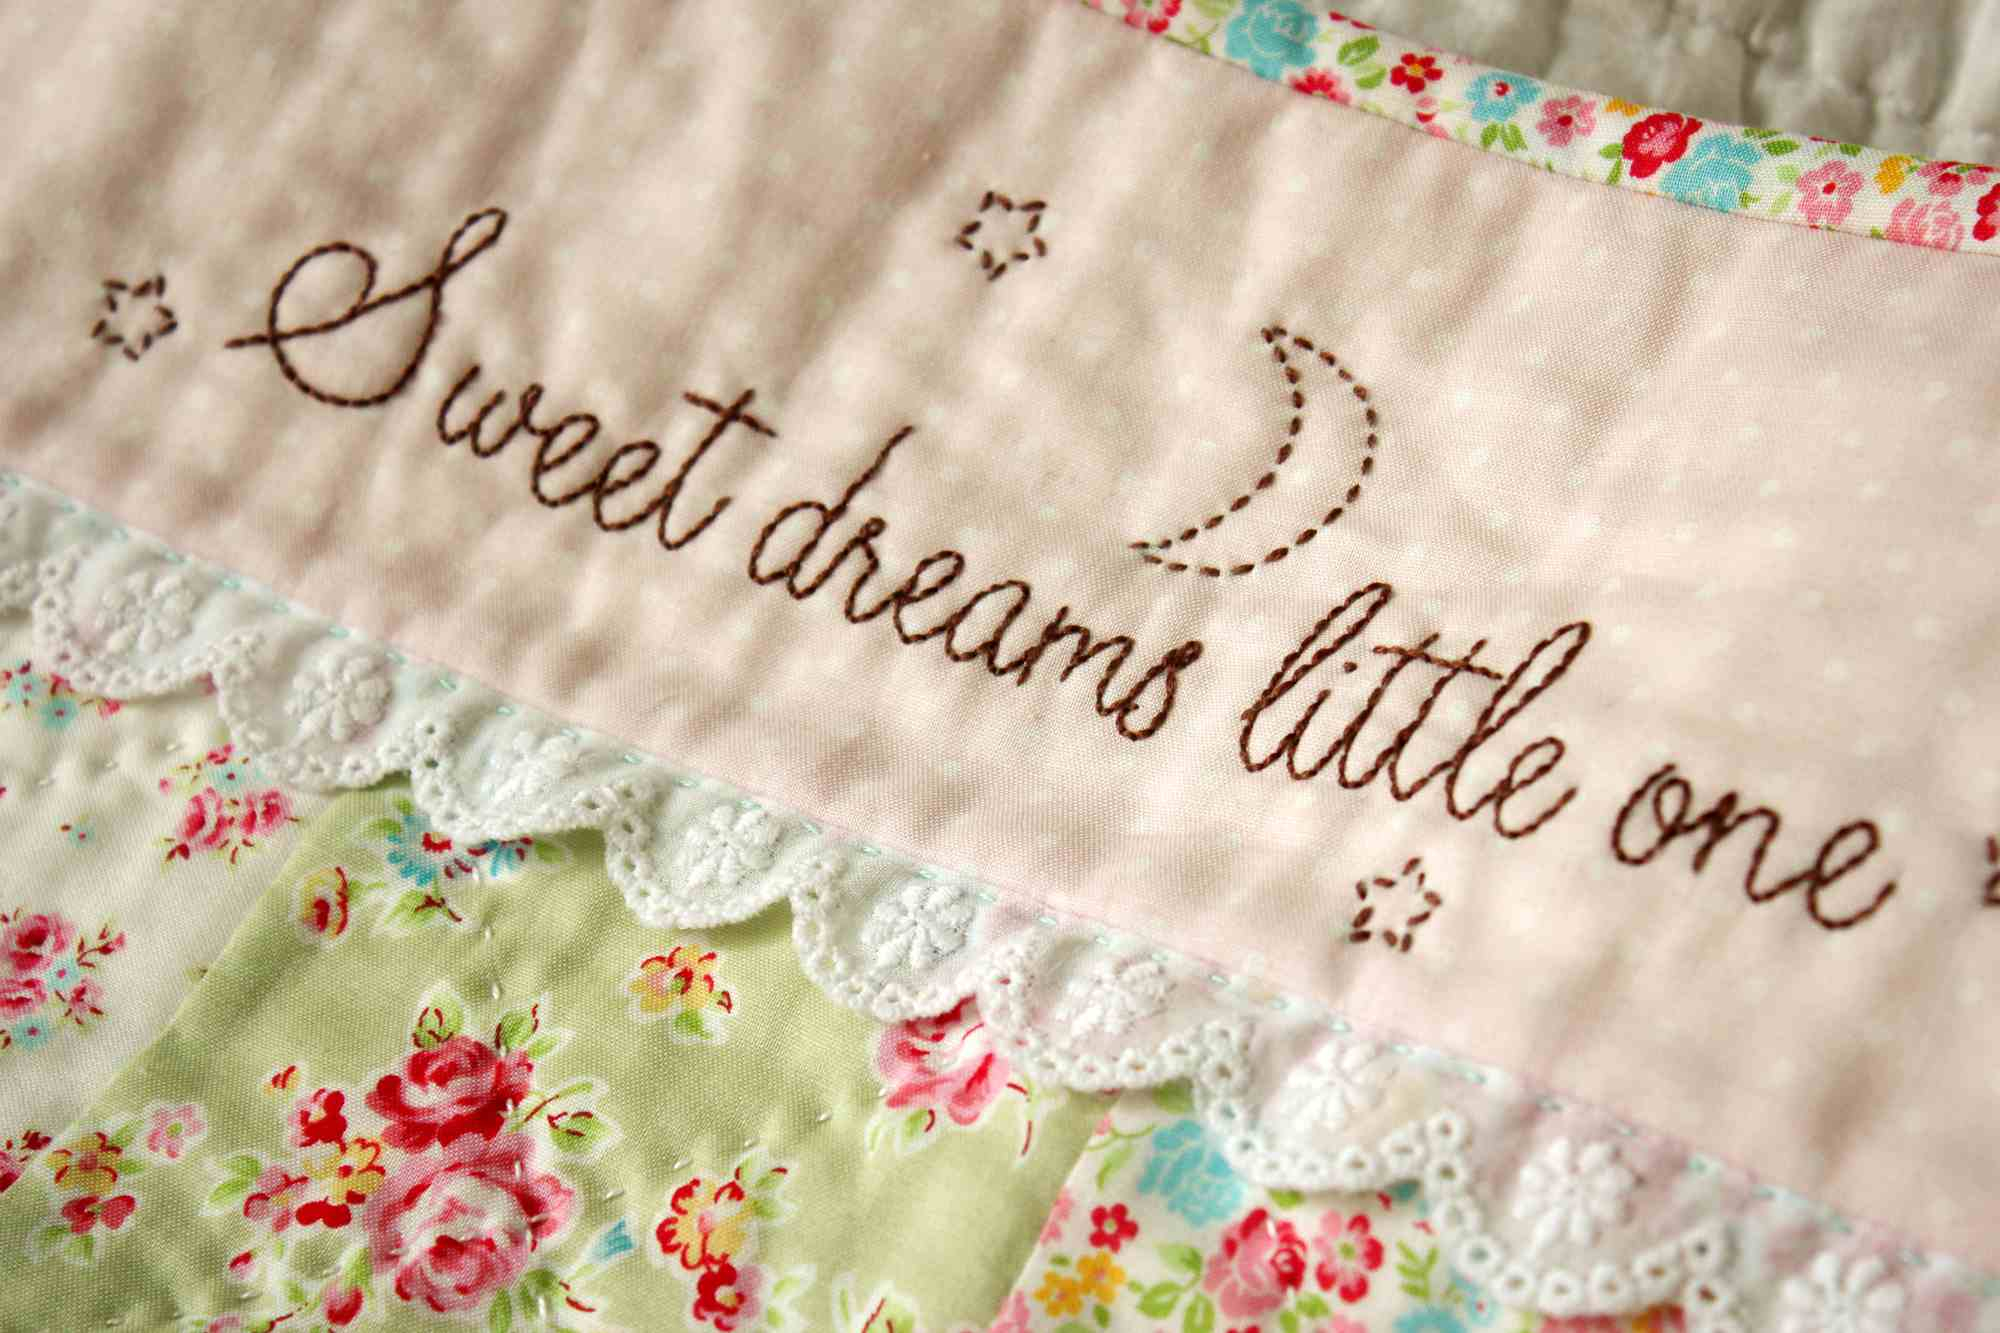 Hand Embroidery Patterns Baby 10 Hand Embroidery Patterns For A New Ba Or Nursery